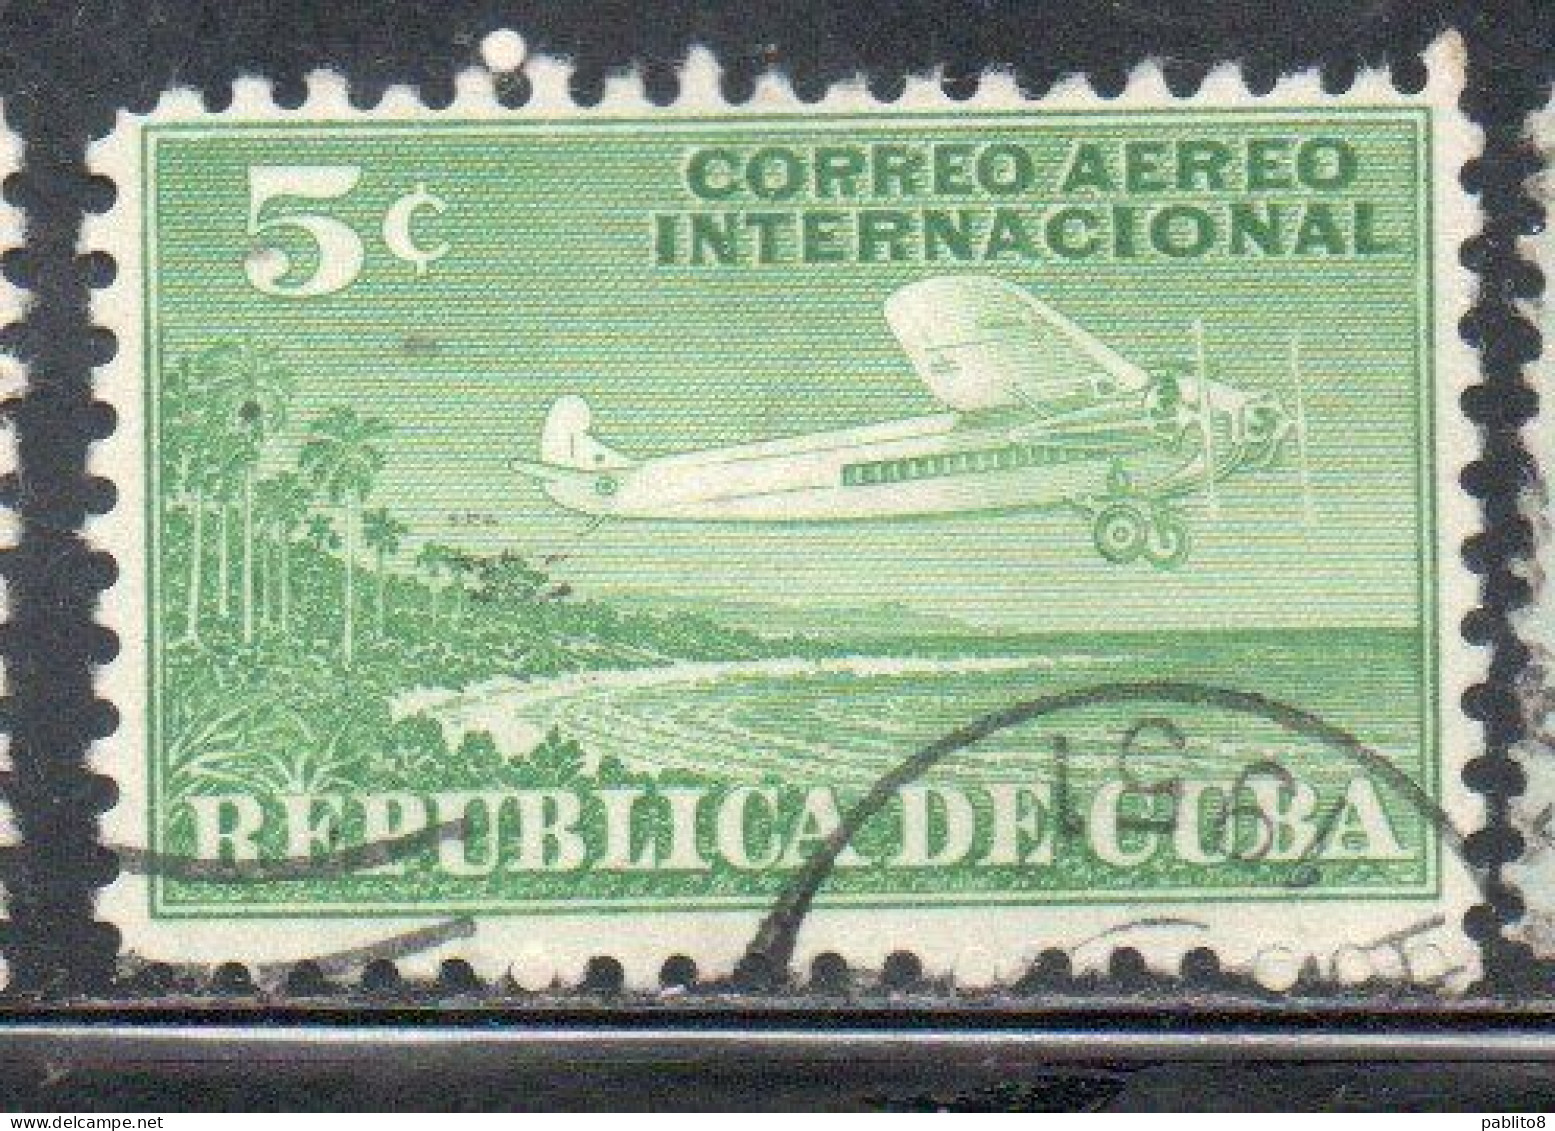 CUBA 1931 AIRMAIL AIR POST MAIL FOR FOREIGN POSTAGE PLANE AND COAST 5c USADO USED USATO OBLITERE' - Luftpost